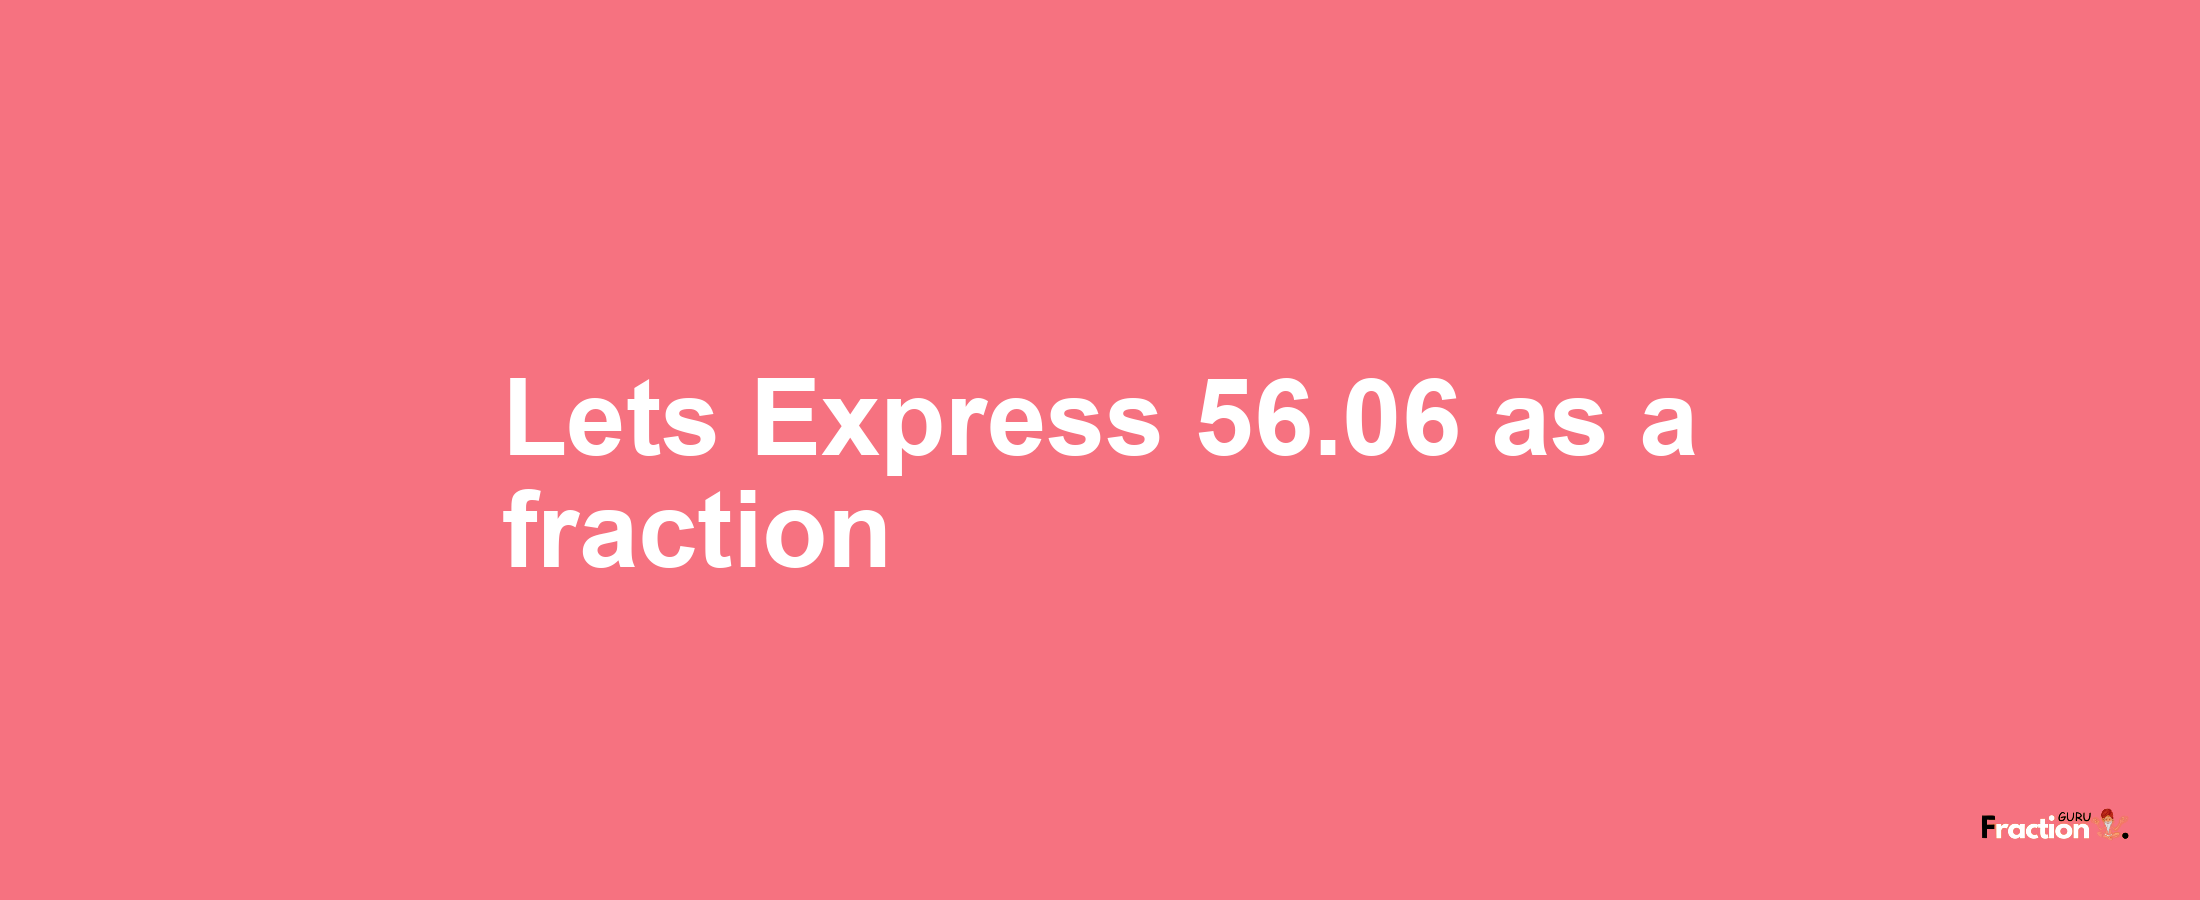 Lets Express 56.06 as afraction